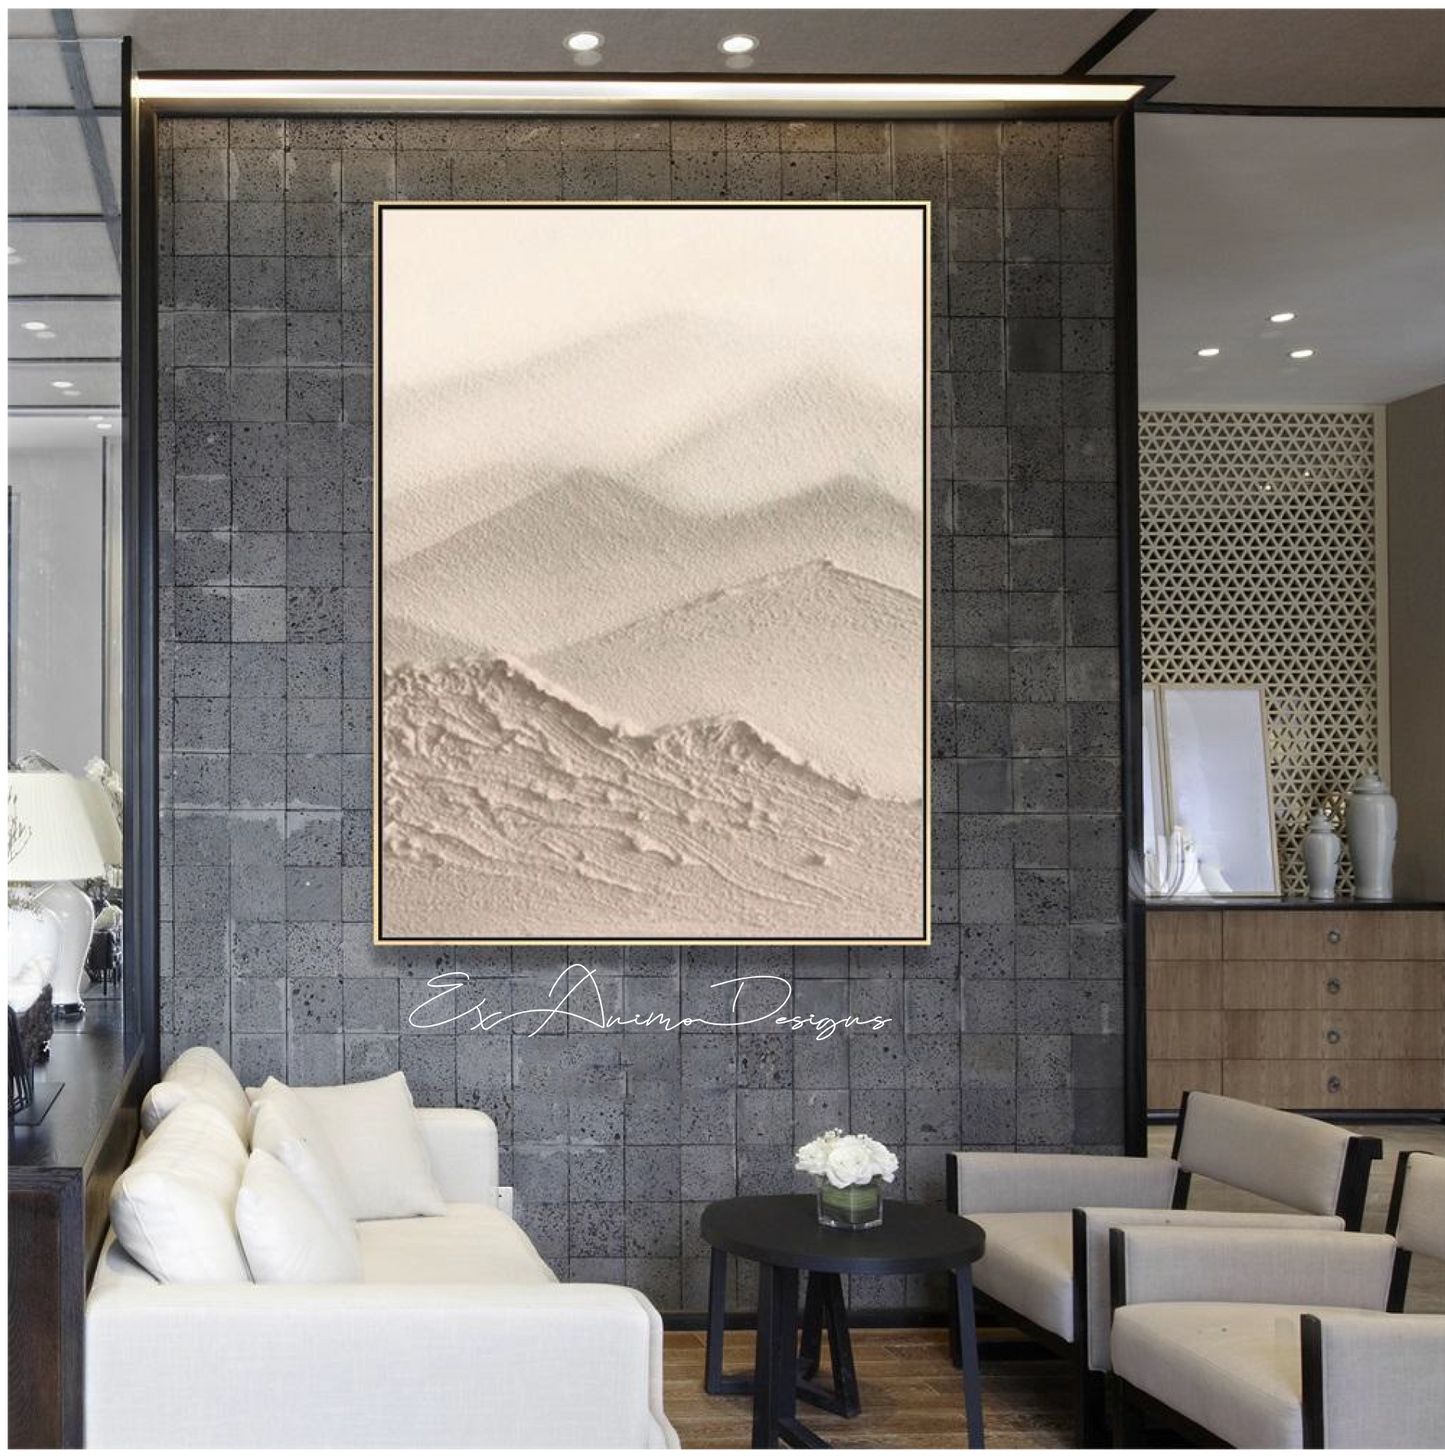 Ex Animo Designs - Mountains Heavily Textured Acrylic Painting